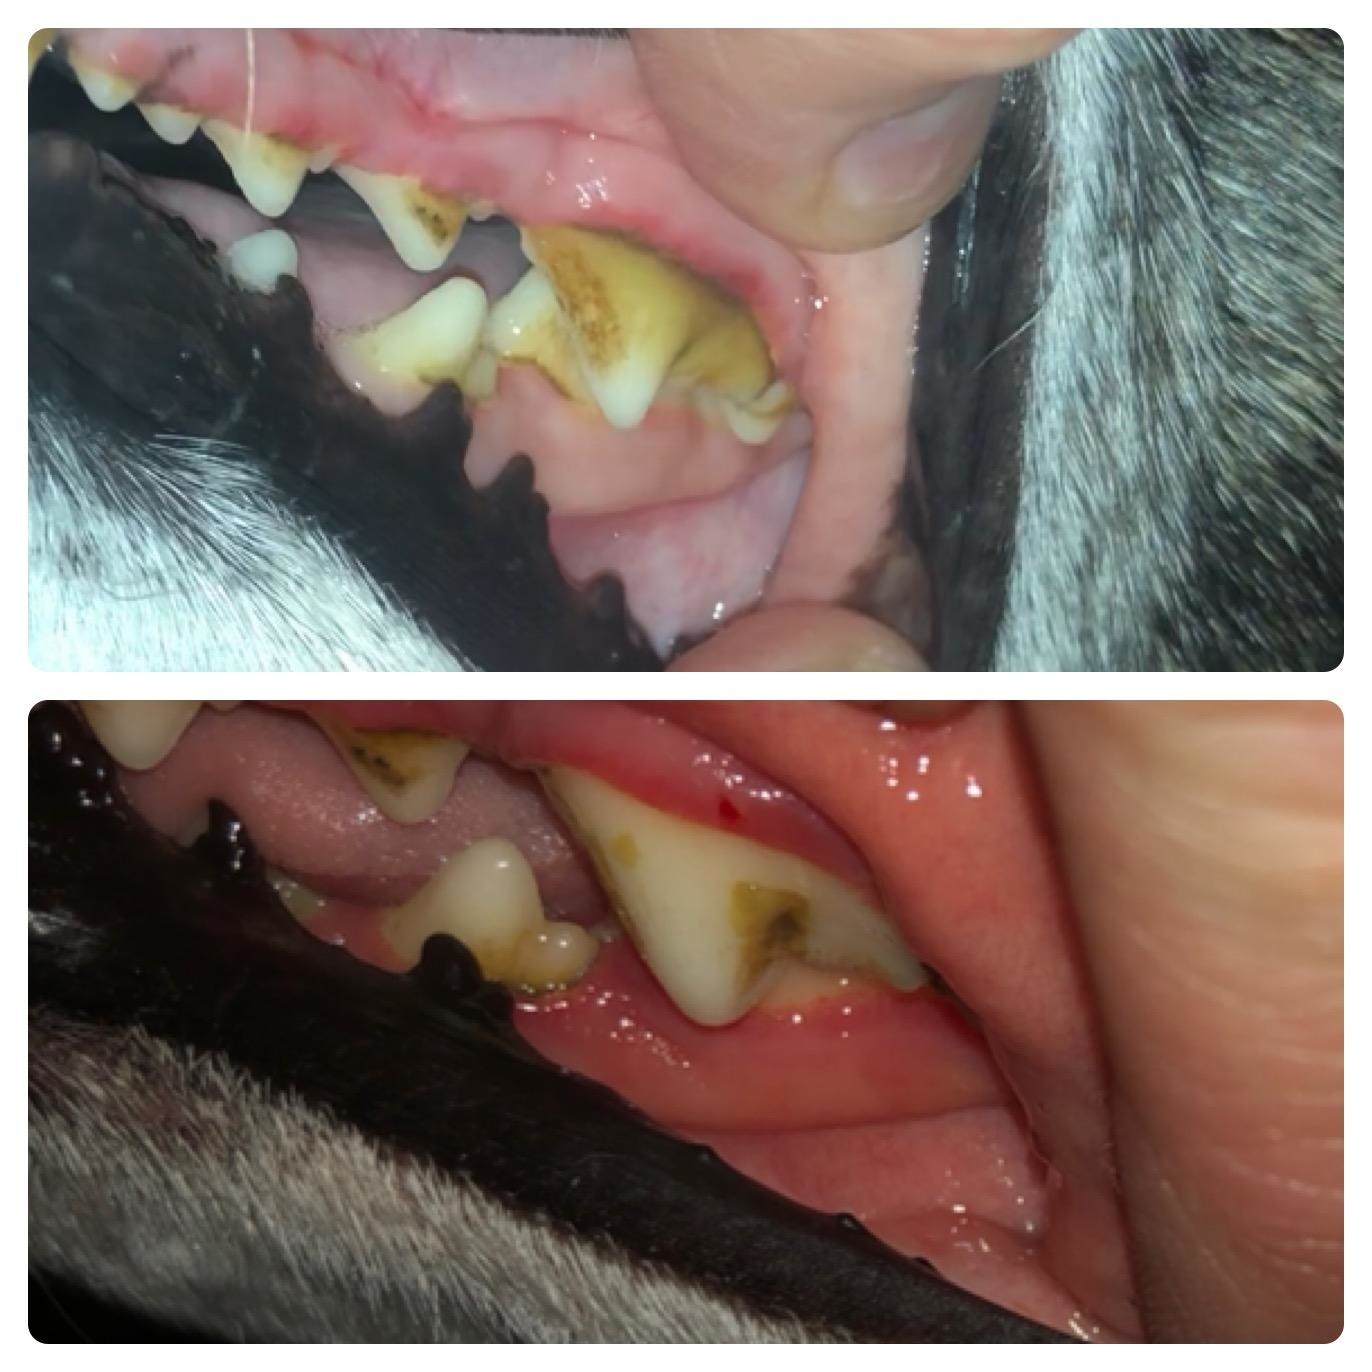 A dog&#x27;s teeth before and after using the toothpaste